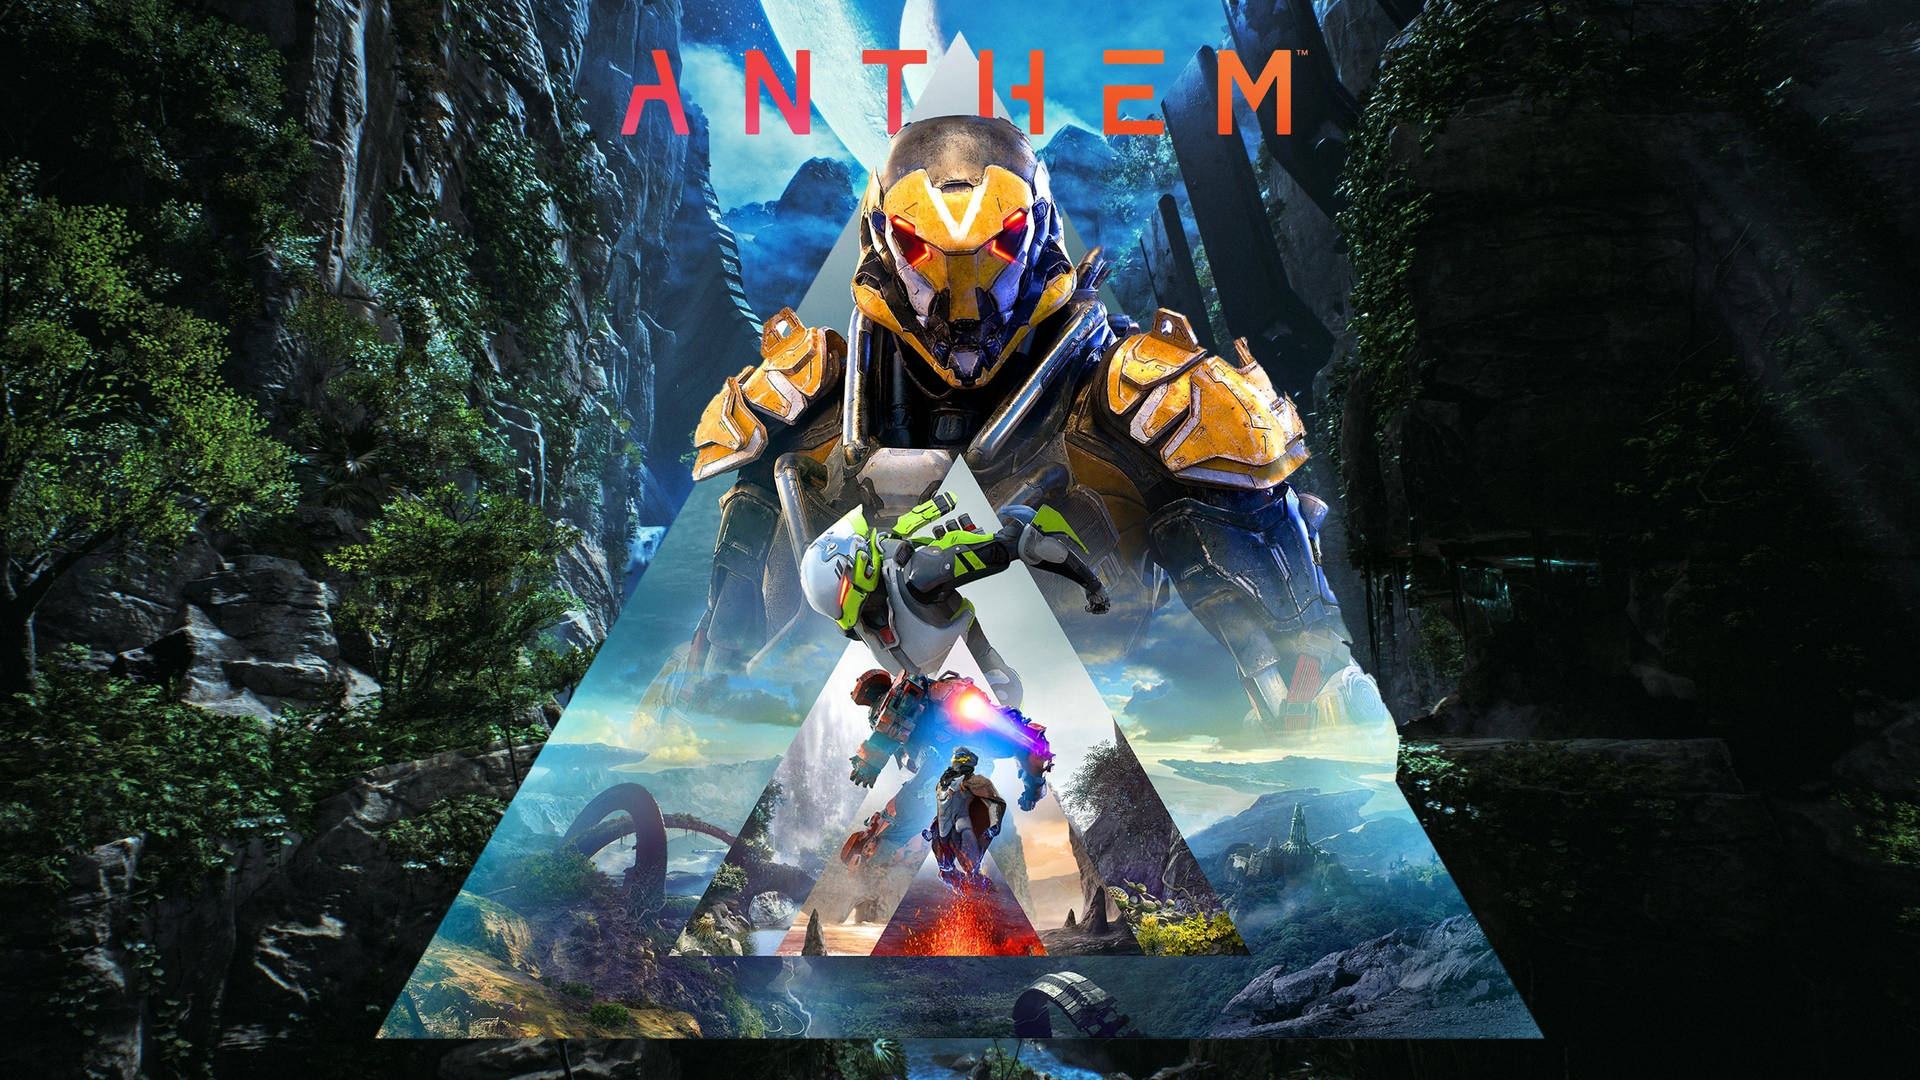 Ready to explore the awe-inspiring landscapes of Anthem? Wallpaper